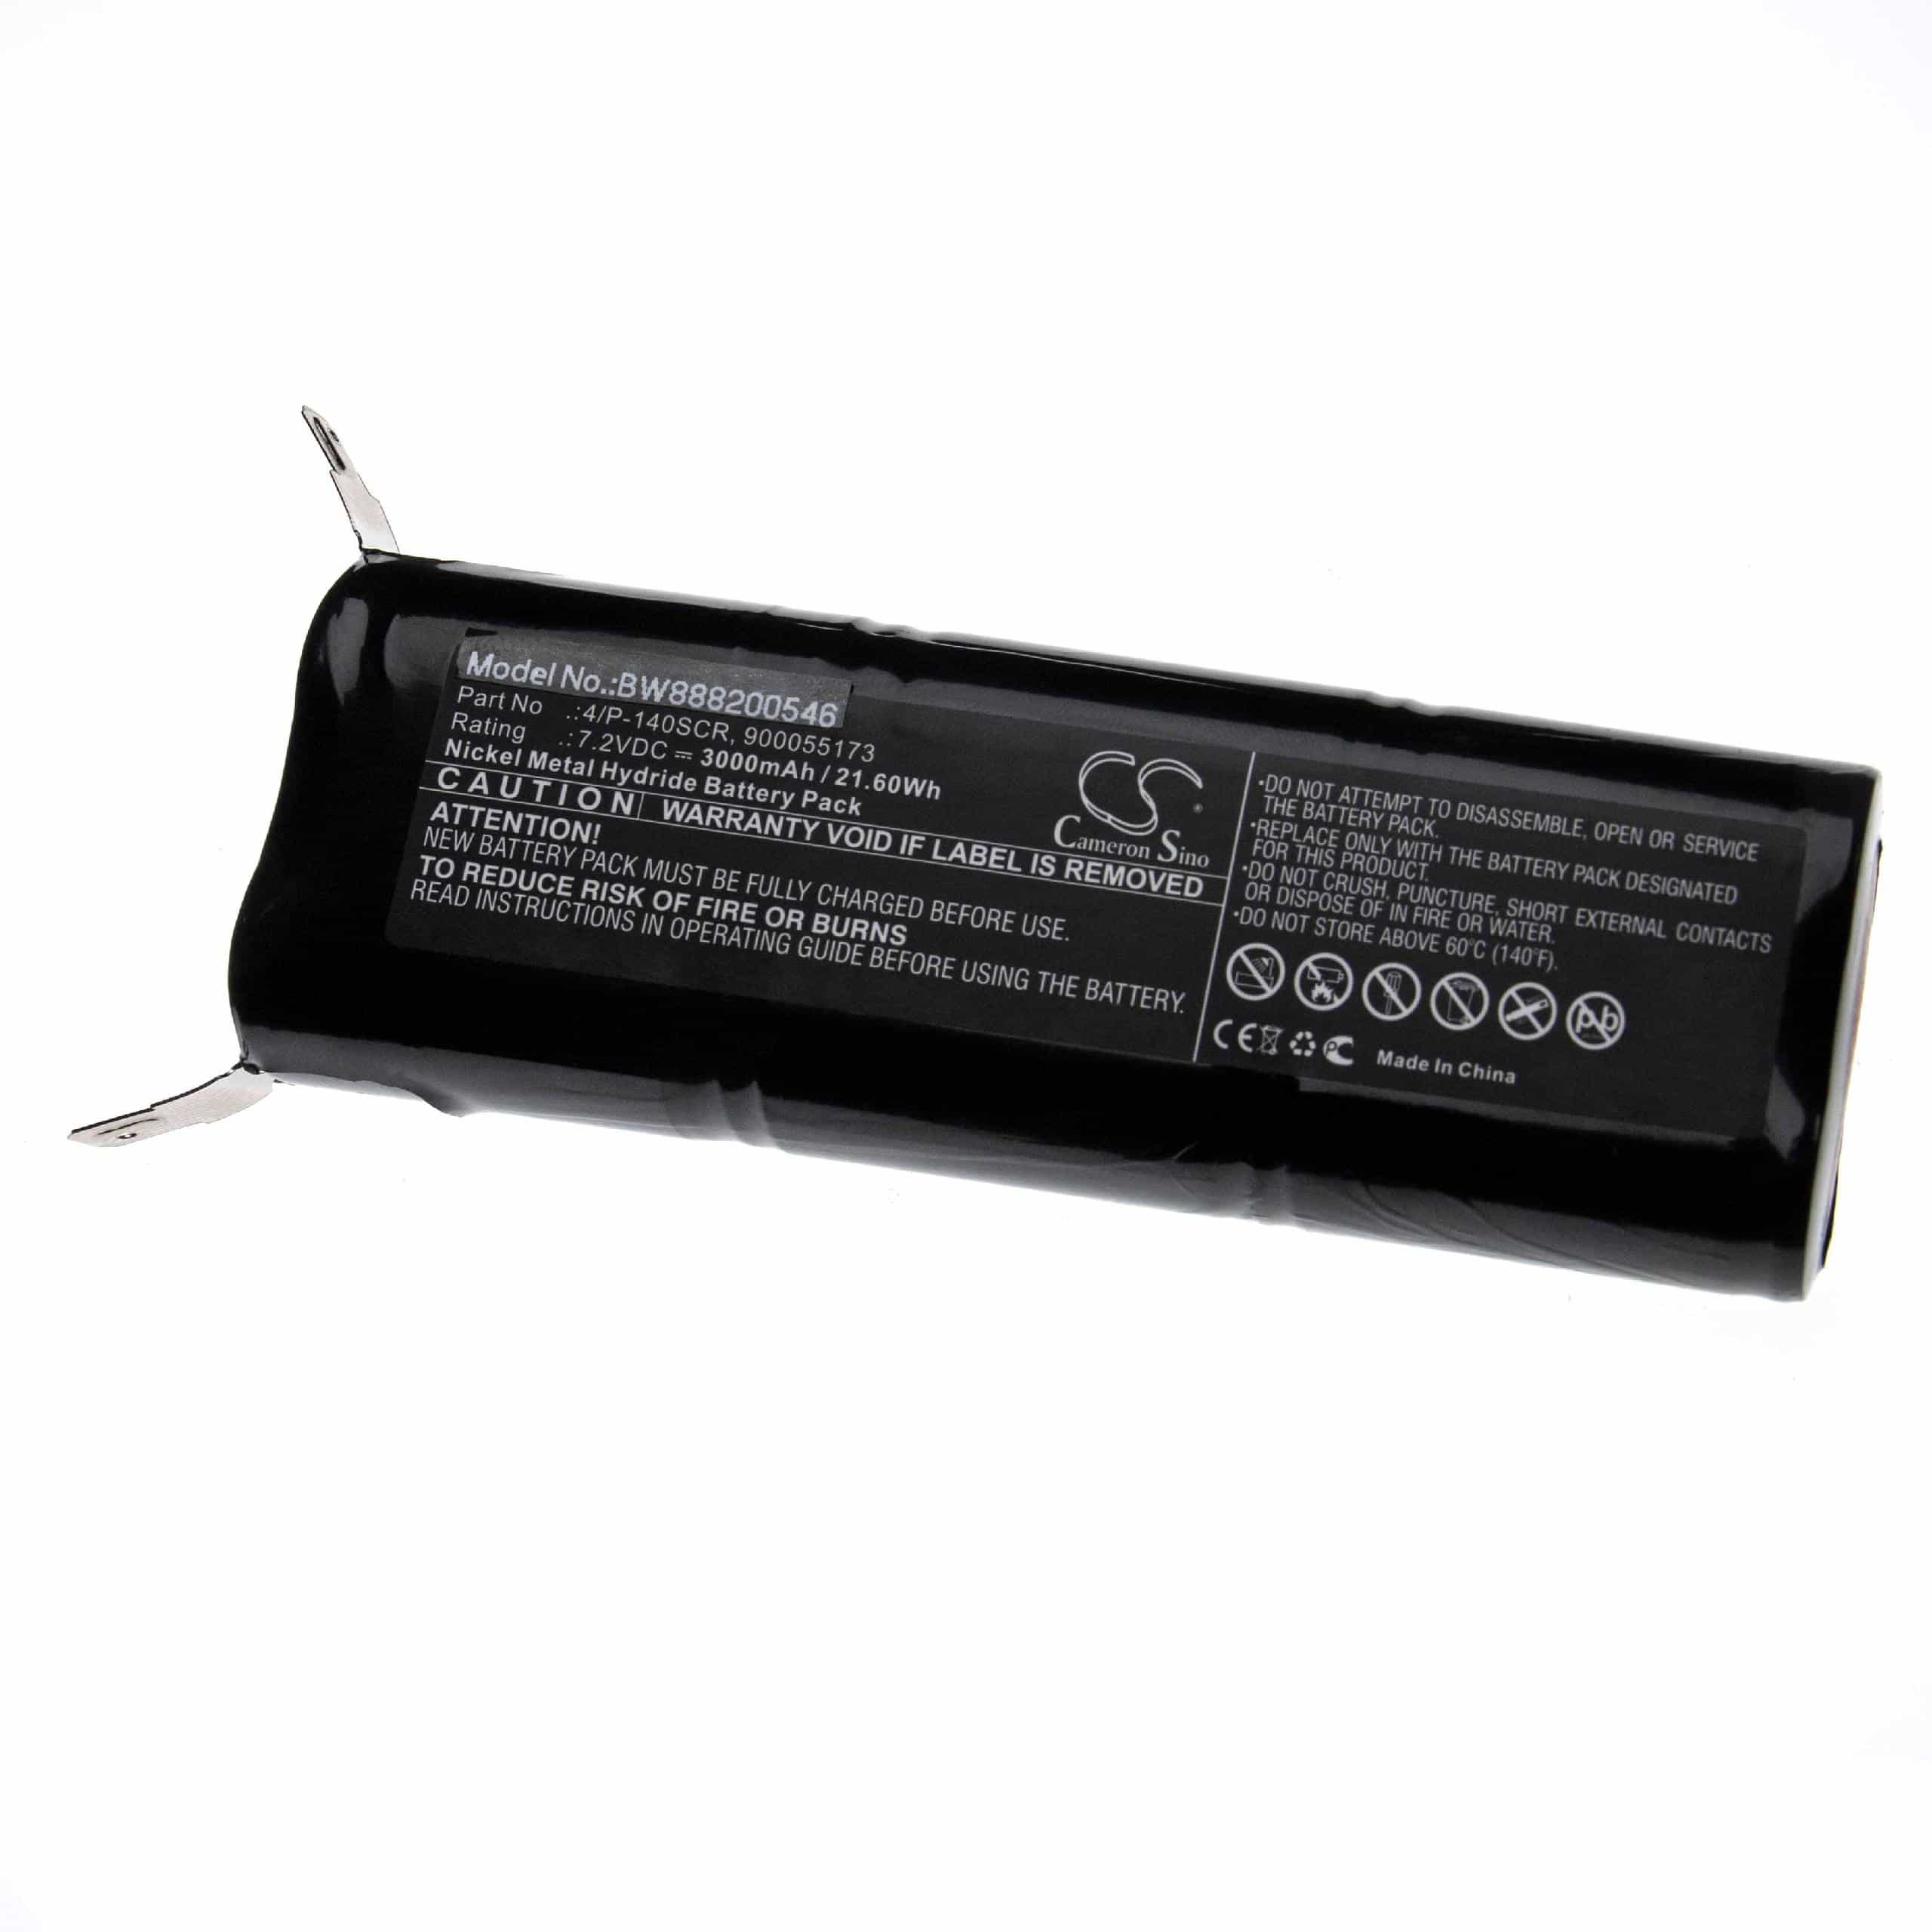 Battery Replacement for Makita BCM-678135-1, 678135-1, 678132-7, 678114-9 for - 3000mAh, 7.2V, NiMH